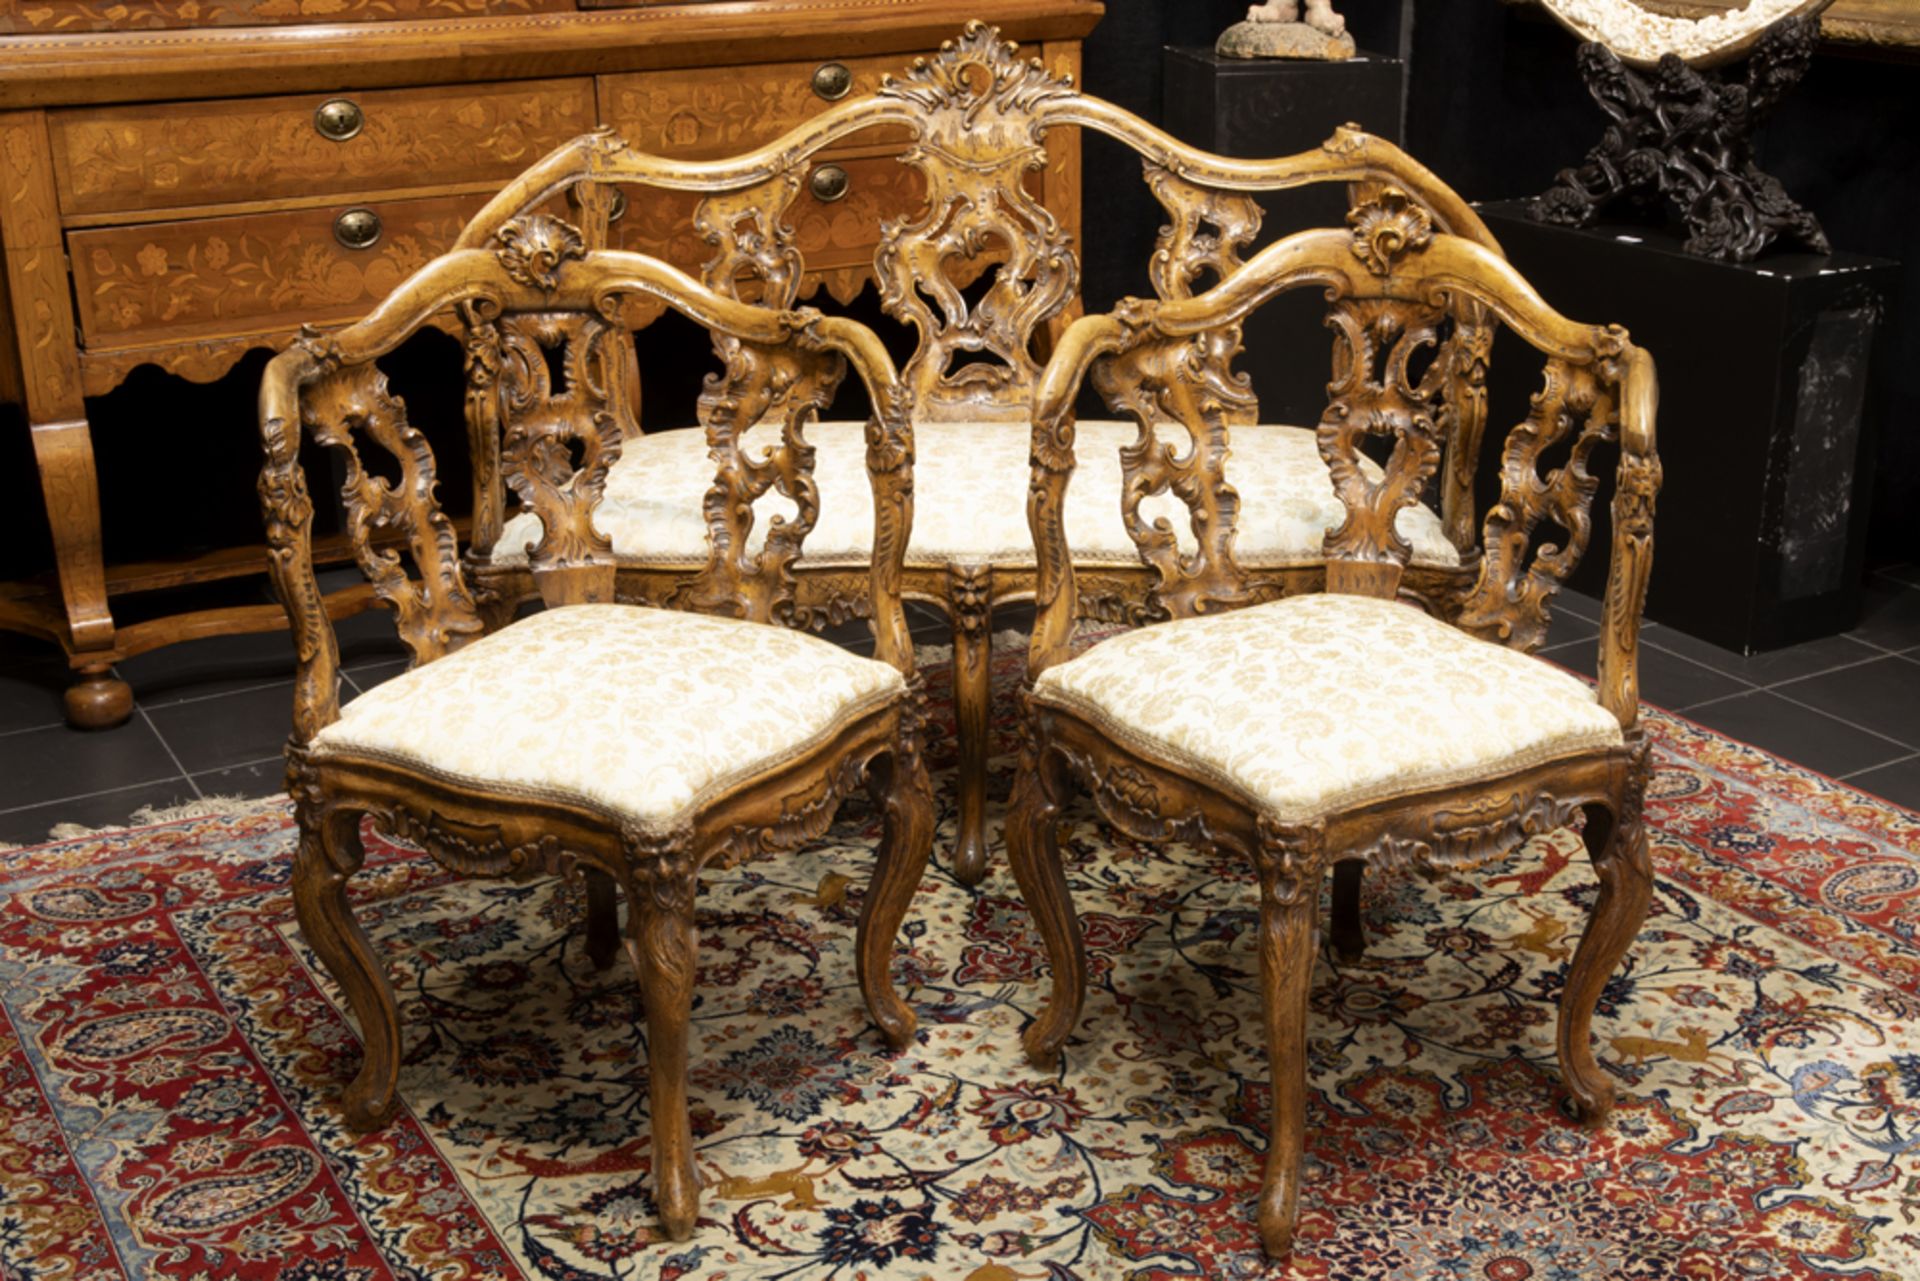 18th Cent. north Italian 3pc rococo style salon suite with an elegant design in walnut with very - Image 2 of 3